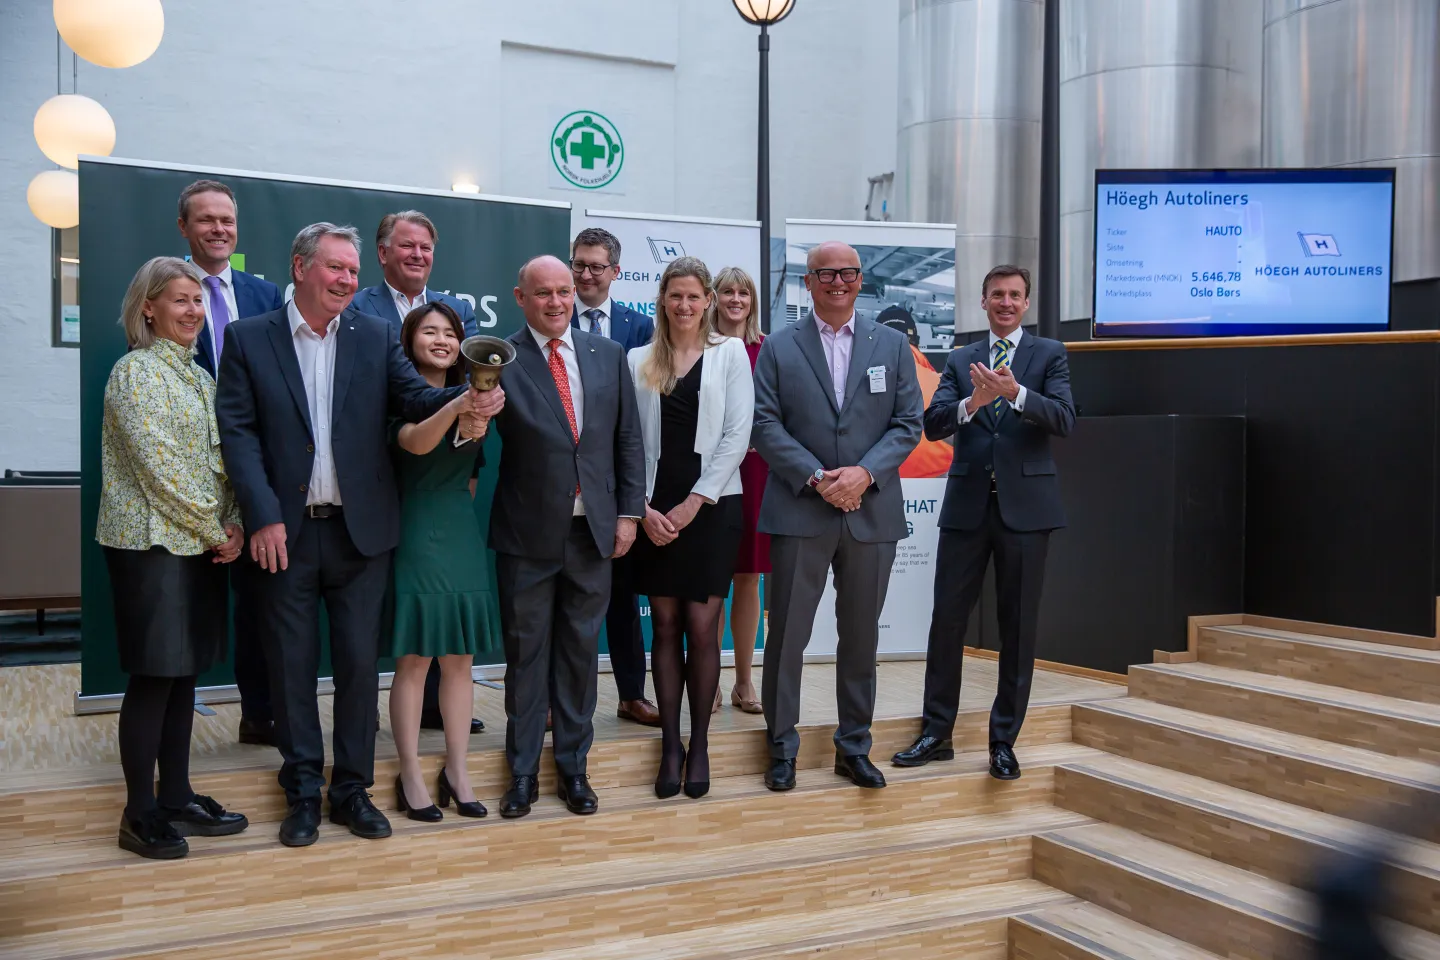 Andreas Enger, CEO of Höegh Autoliners together with the team, rang the bell this morning to celebrate the transfer of the company to Oslo Børs main market. They were welcomed by Øivind Amundsen, CEO Oslo Børs. (Photo: Christopher Fey/NTB)